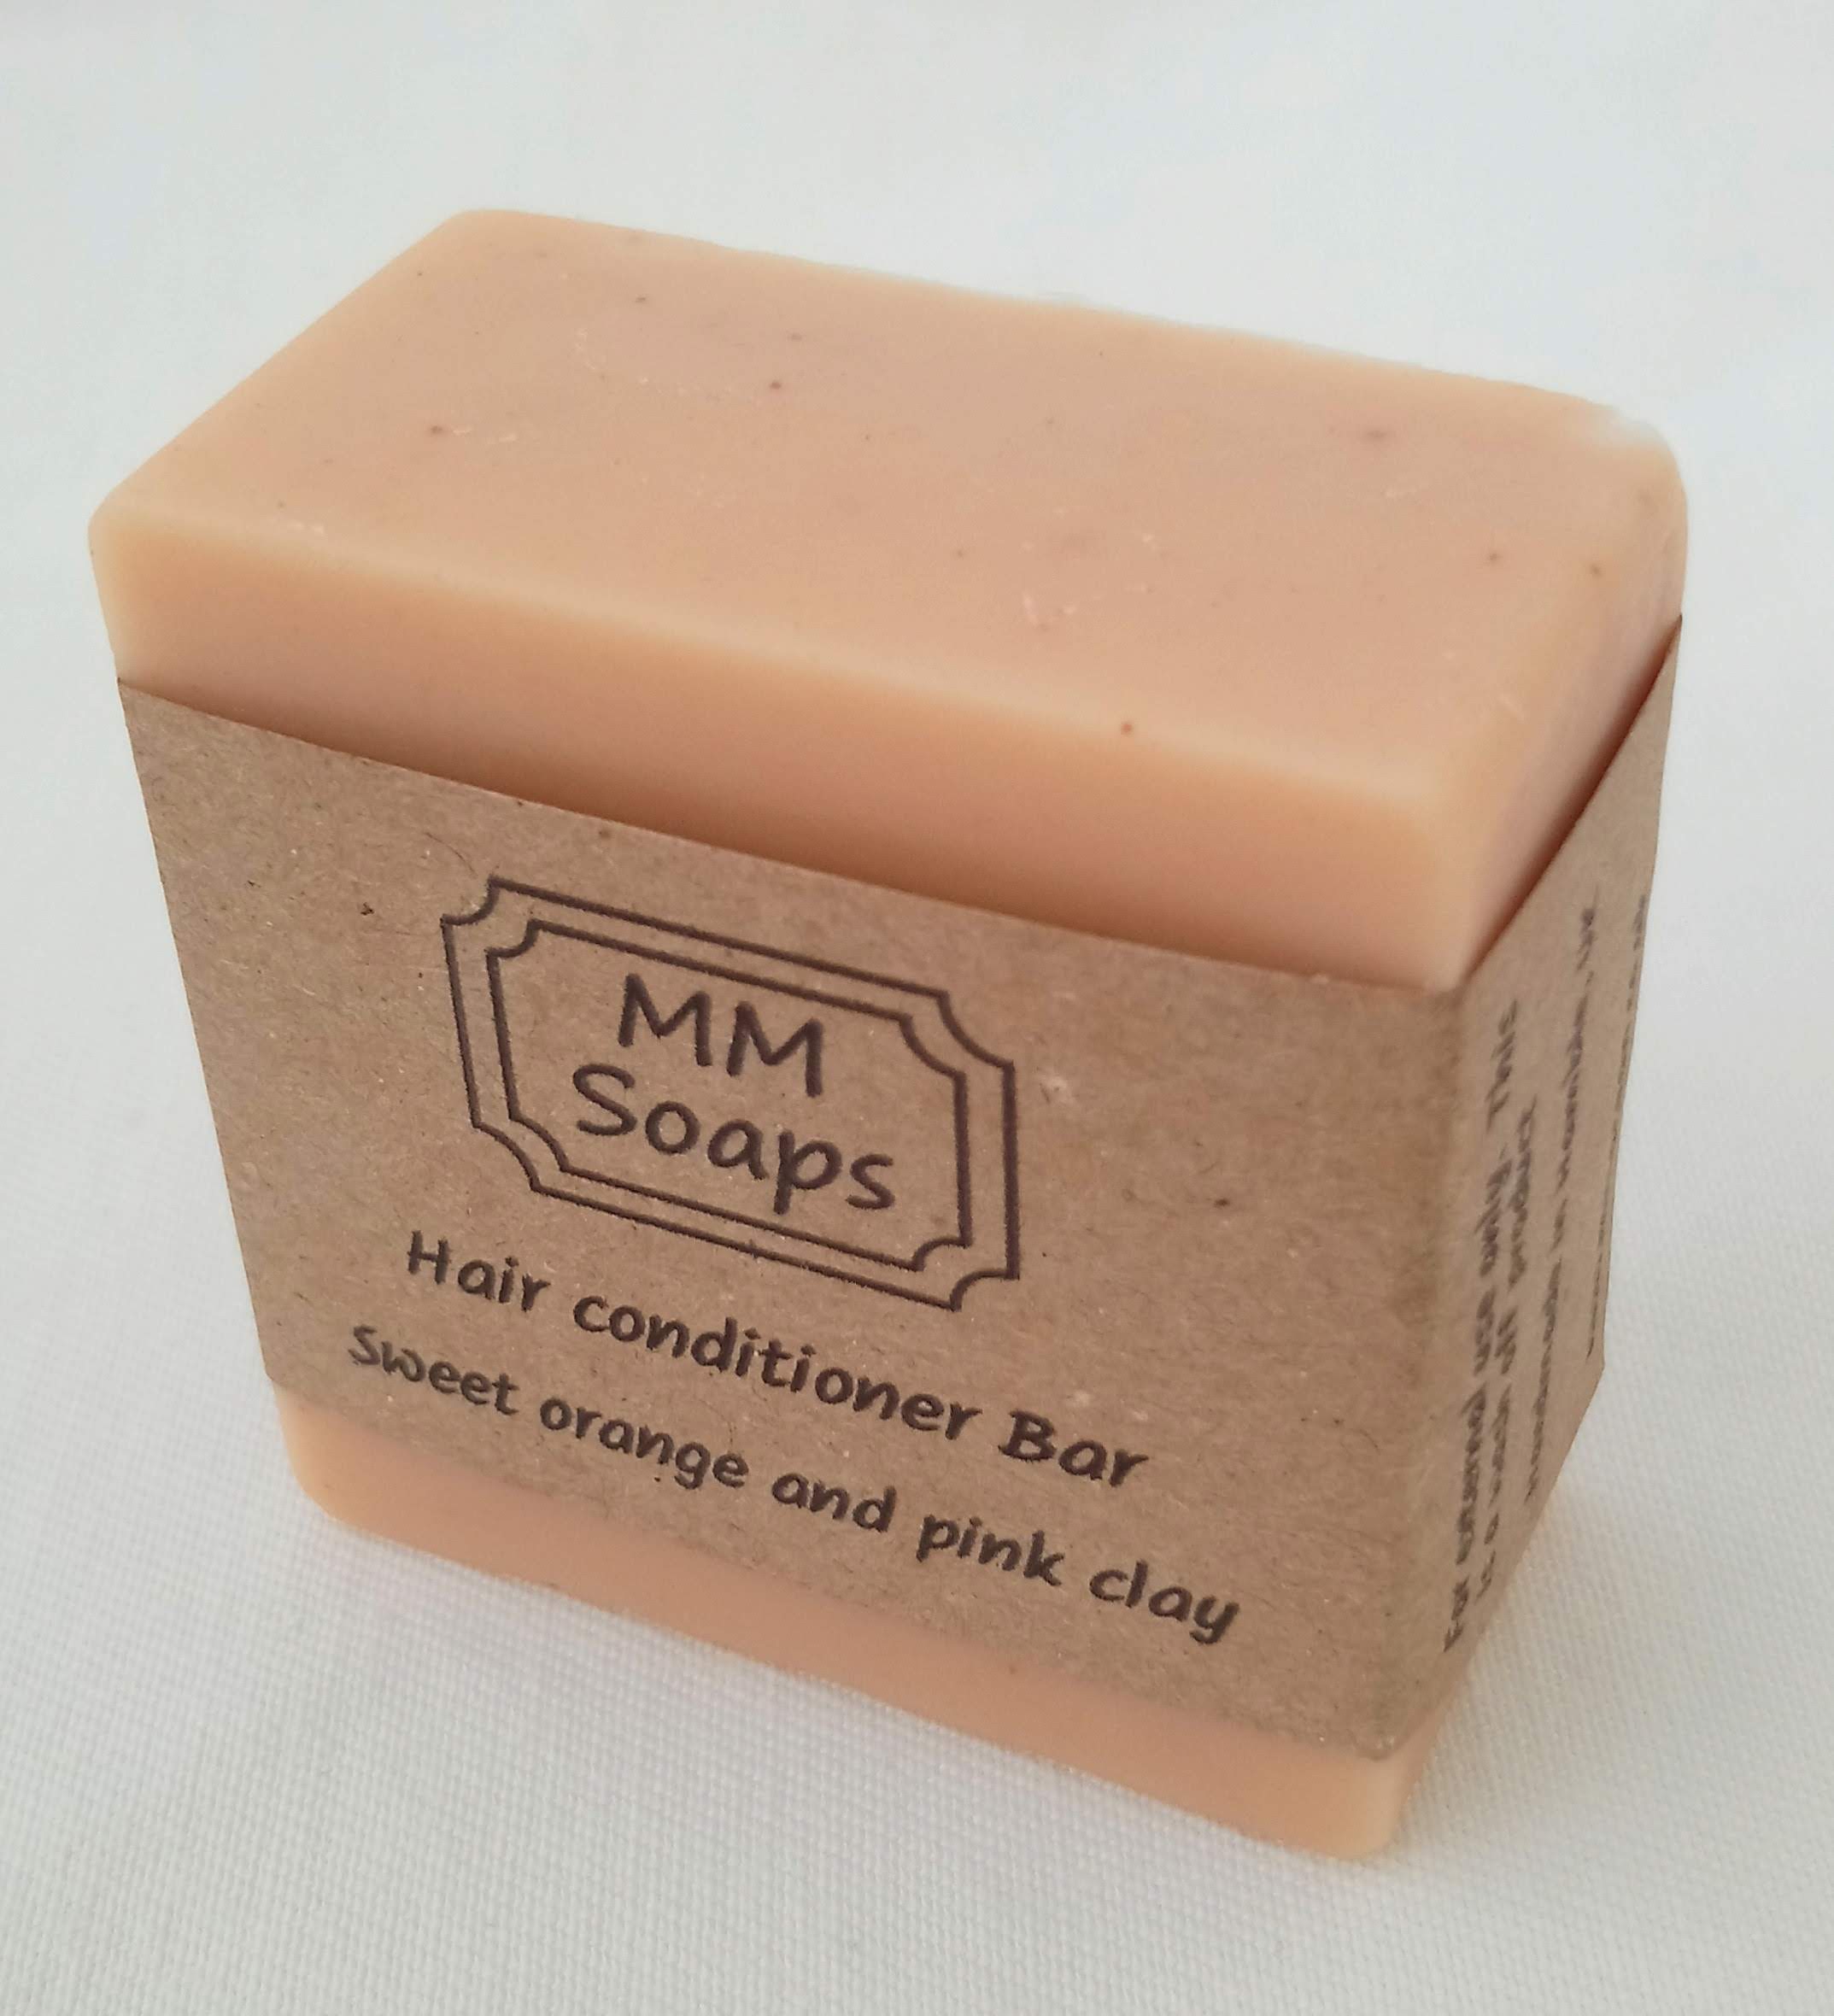 Sweet Orange and Pink Clay Conditioner Bar